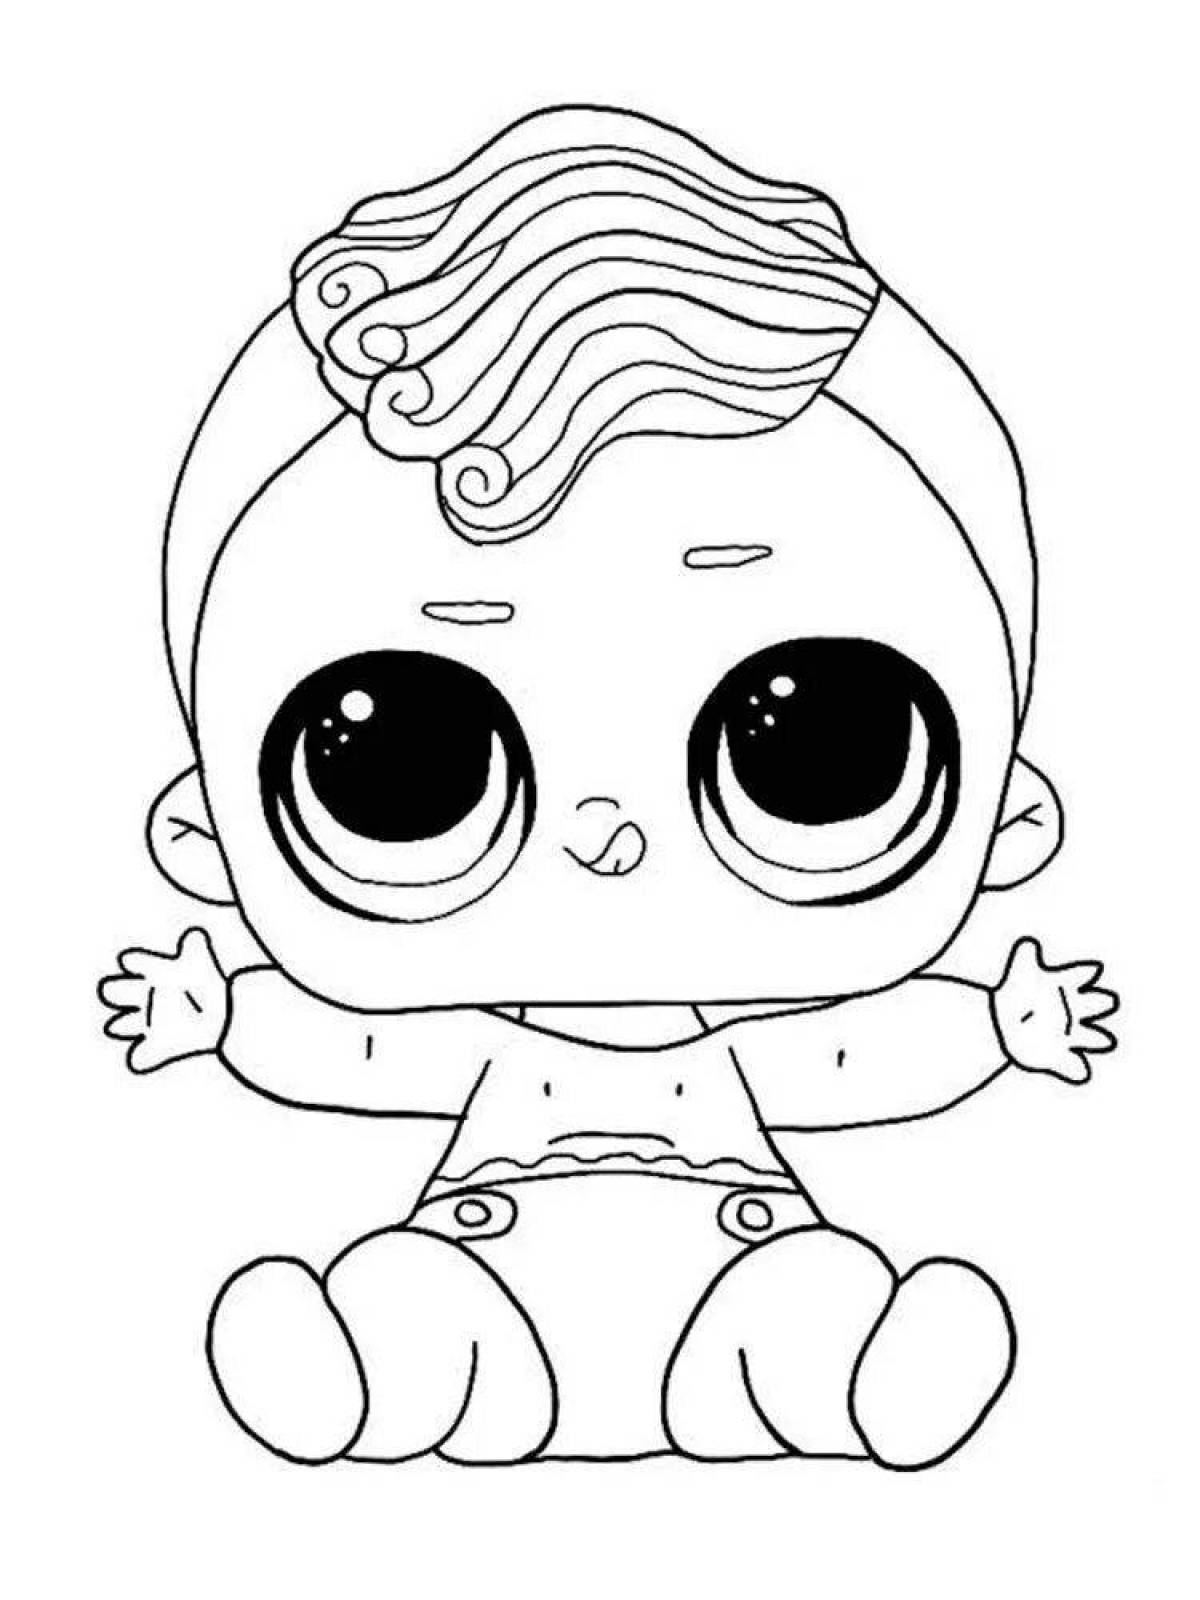 Radiant coloring page doll lol boy